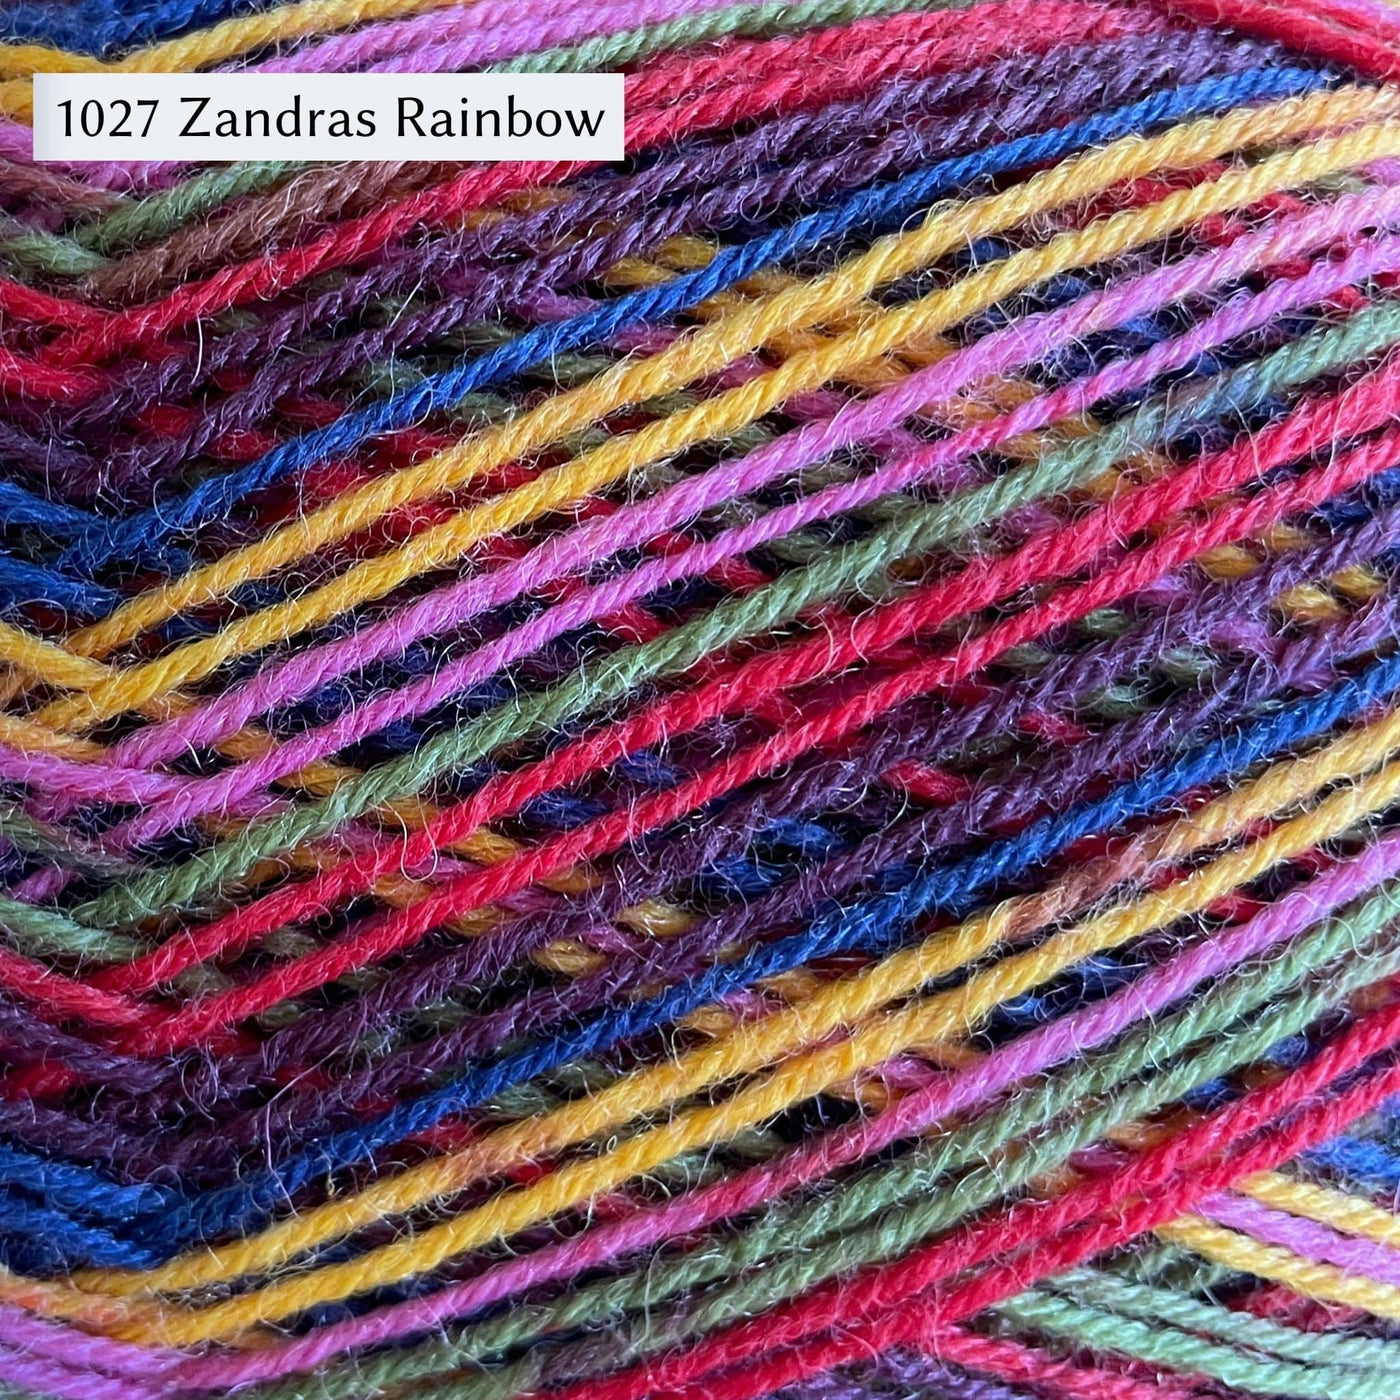 West Yorkshire Spinners Signature 4ply yarn, fingering weight, in color 1027 Zandras Rainbow, a multicolor rainbow of dark purple, royal blue, yellow, pink, light green, and red.